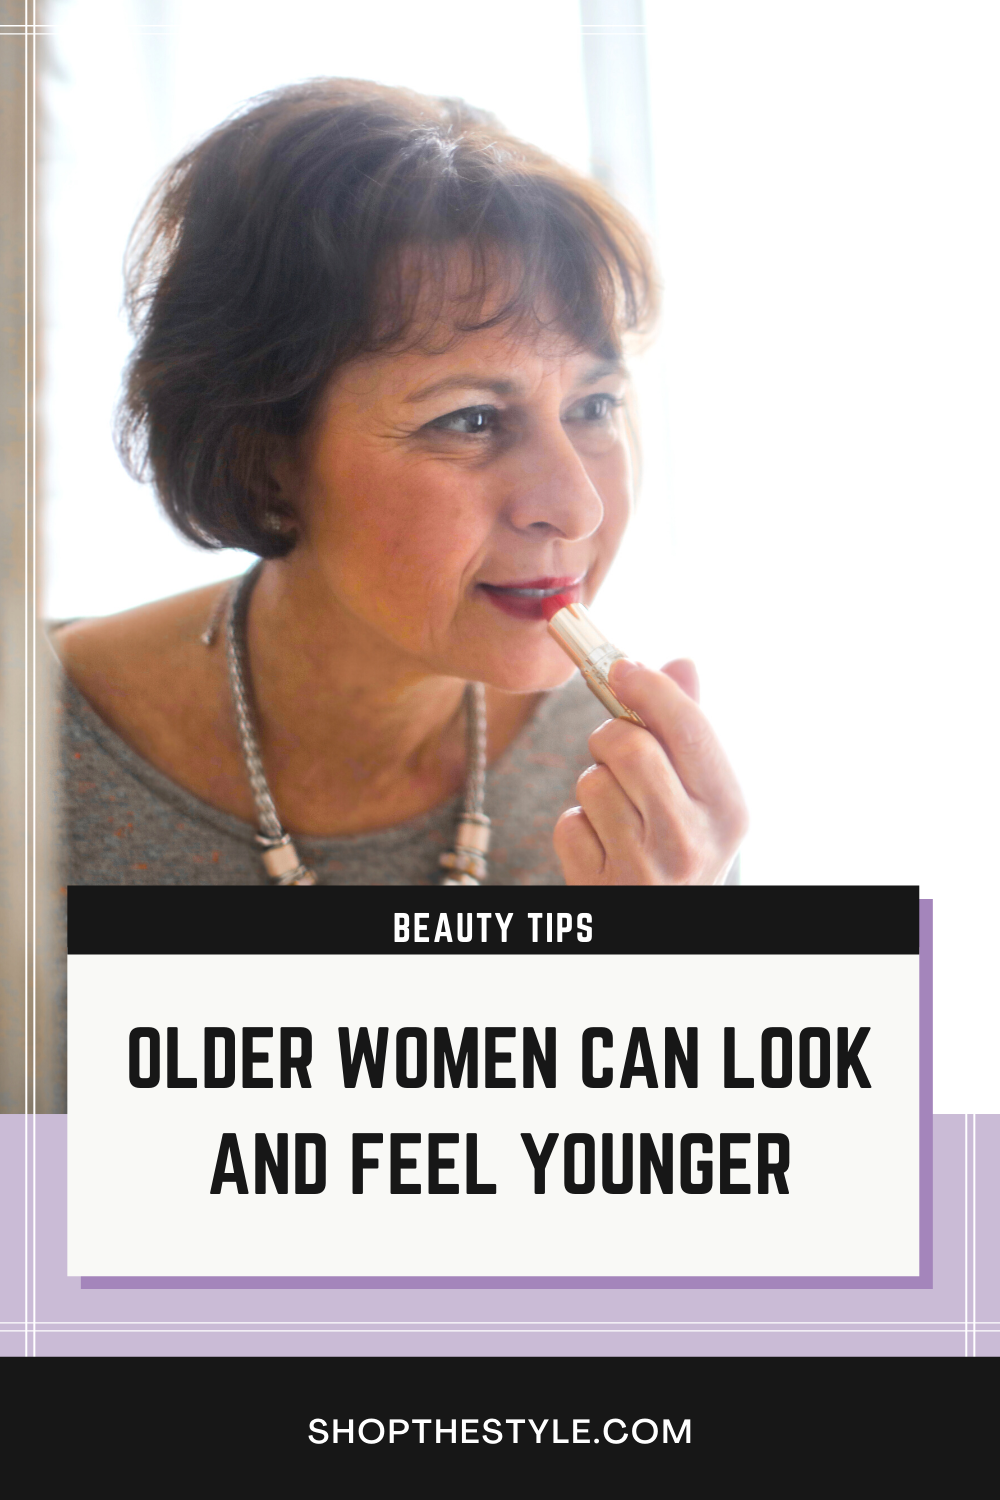 Beauty Tips For Older Ladies To Look And Feel Younger